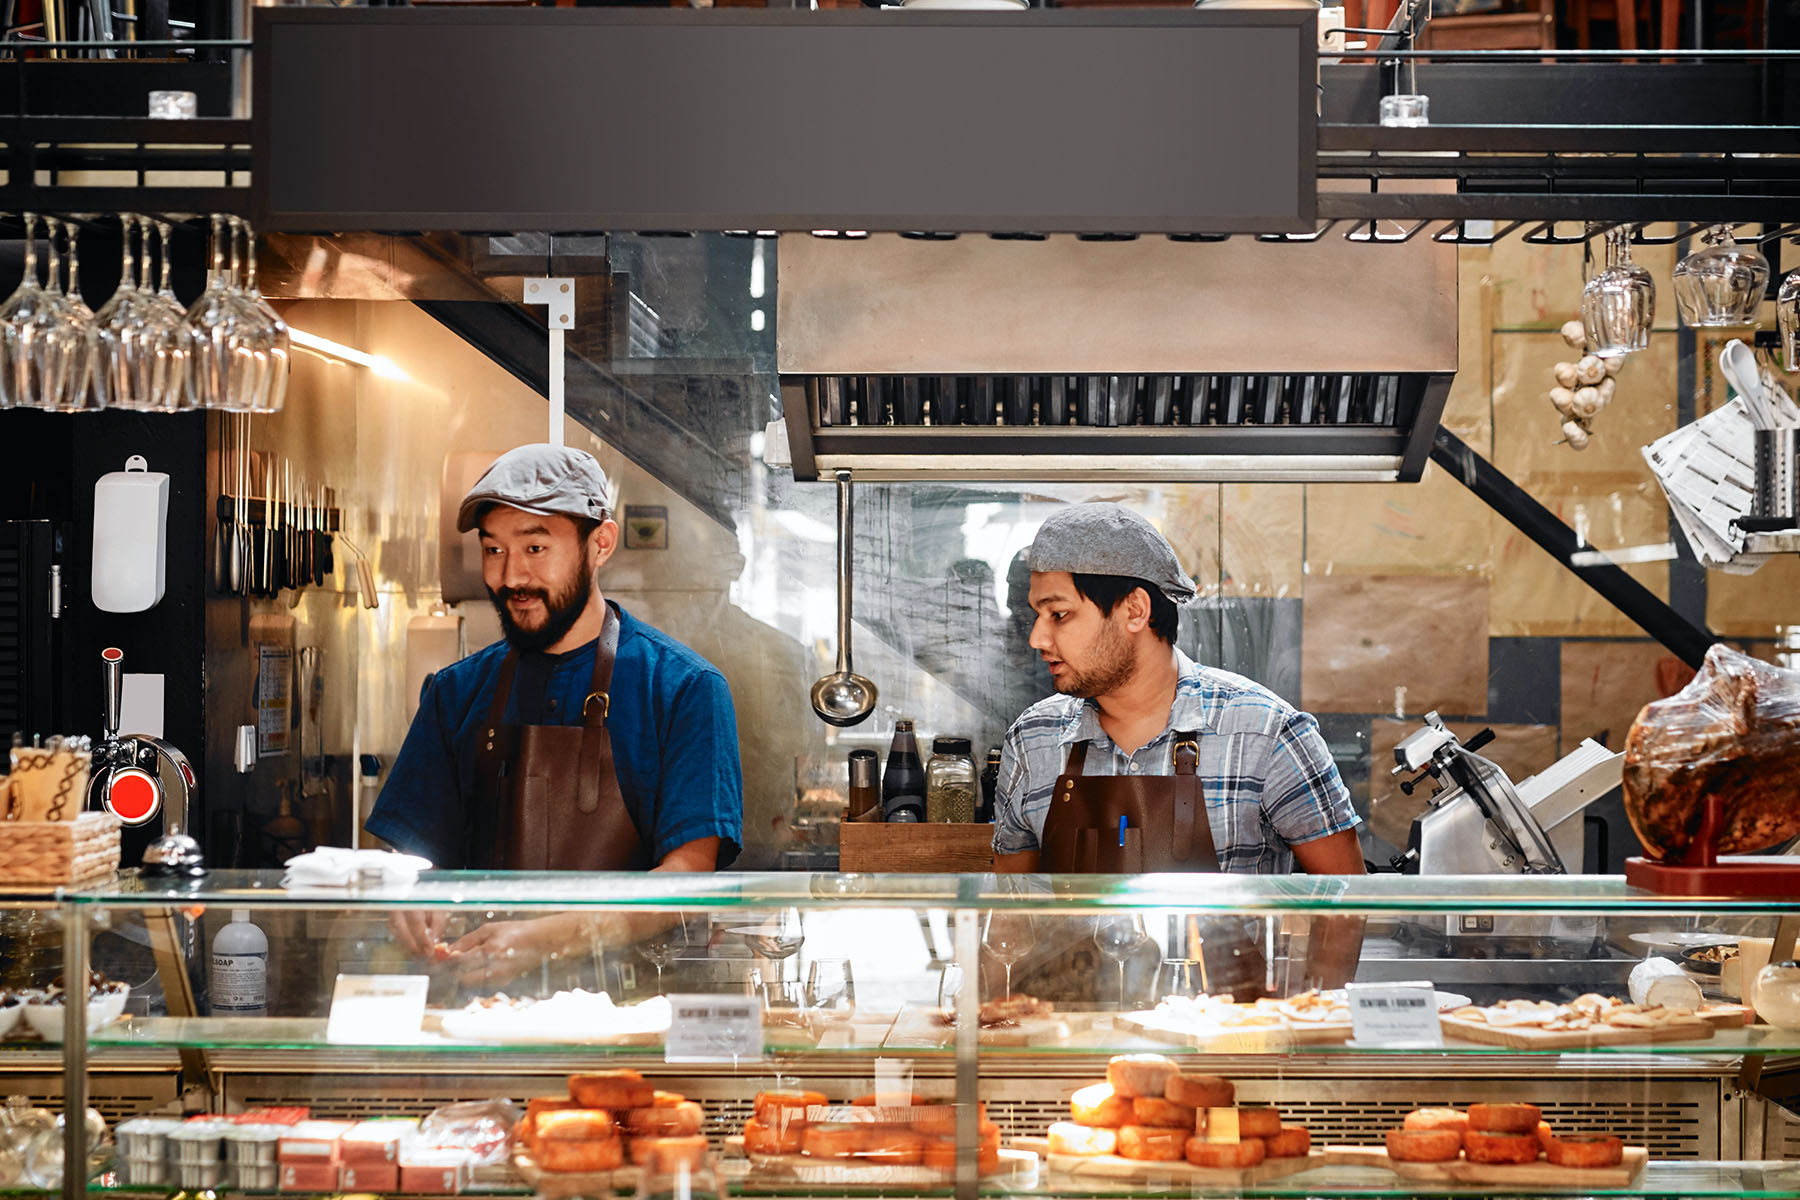 Two men working behind the counter of a food store or cafe. One is caught staring while the other one is looking at what he's making.